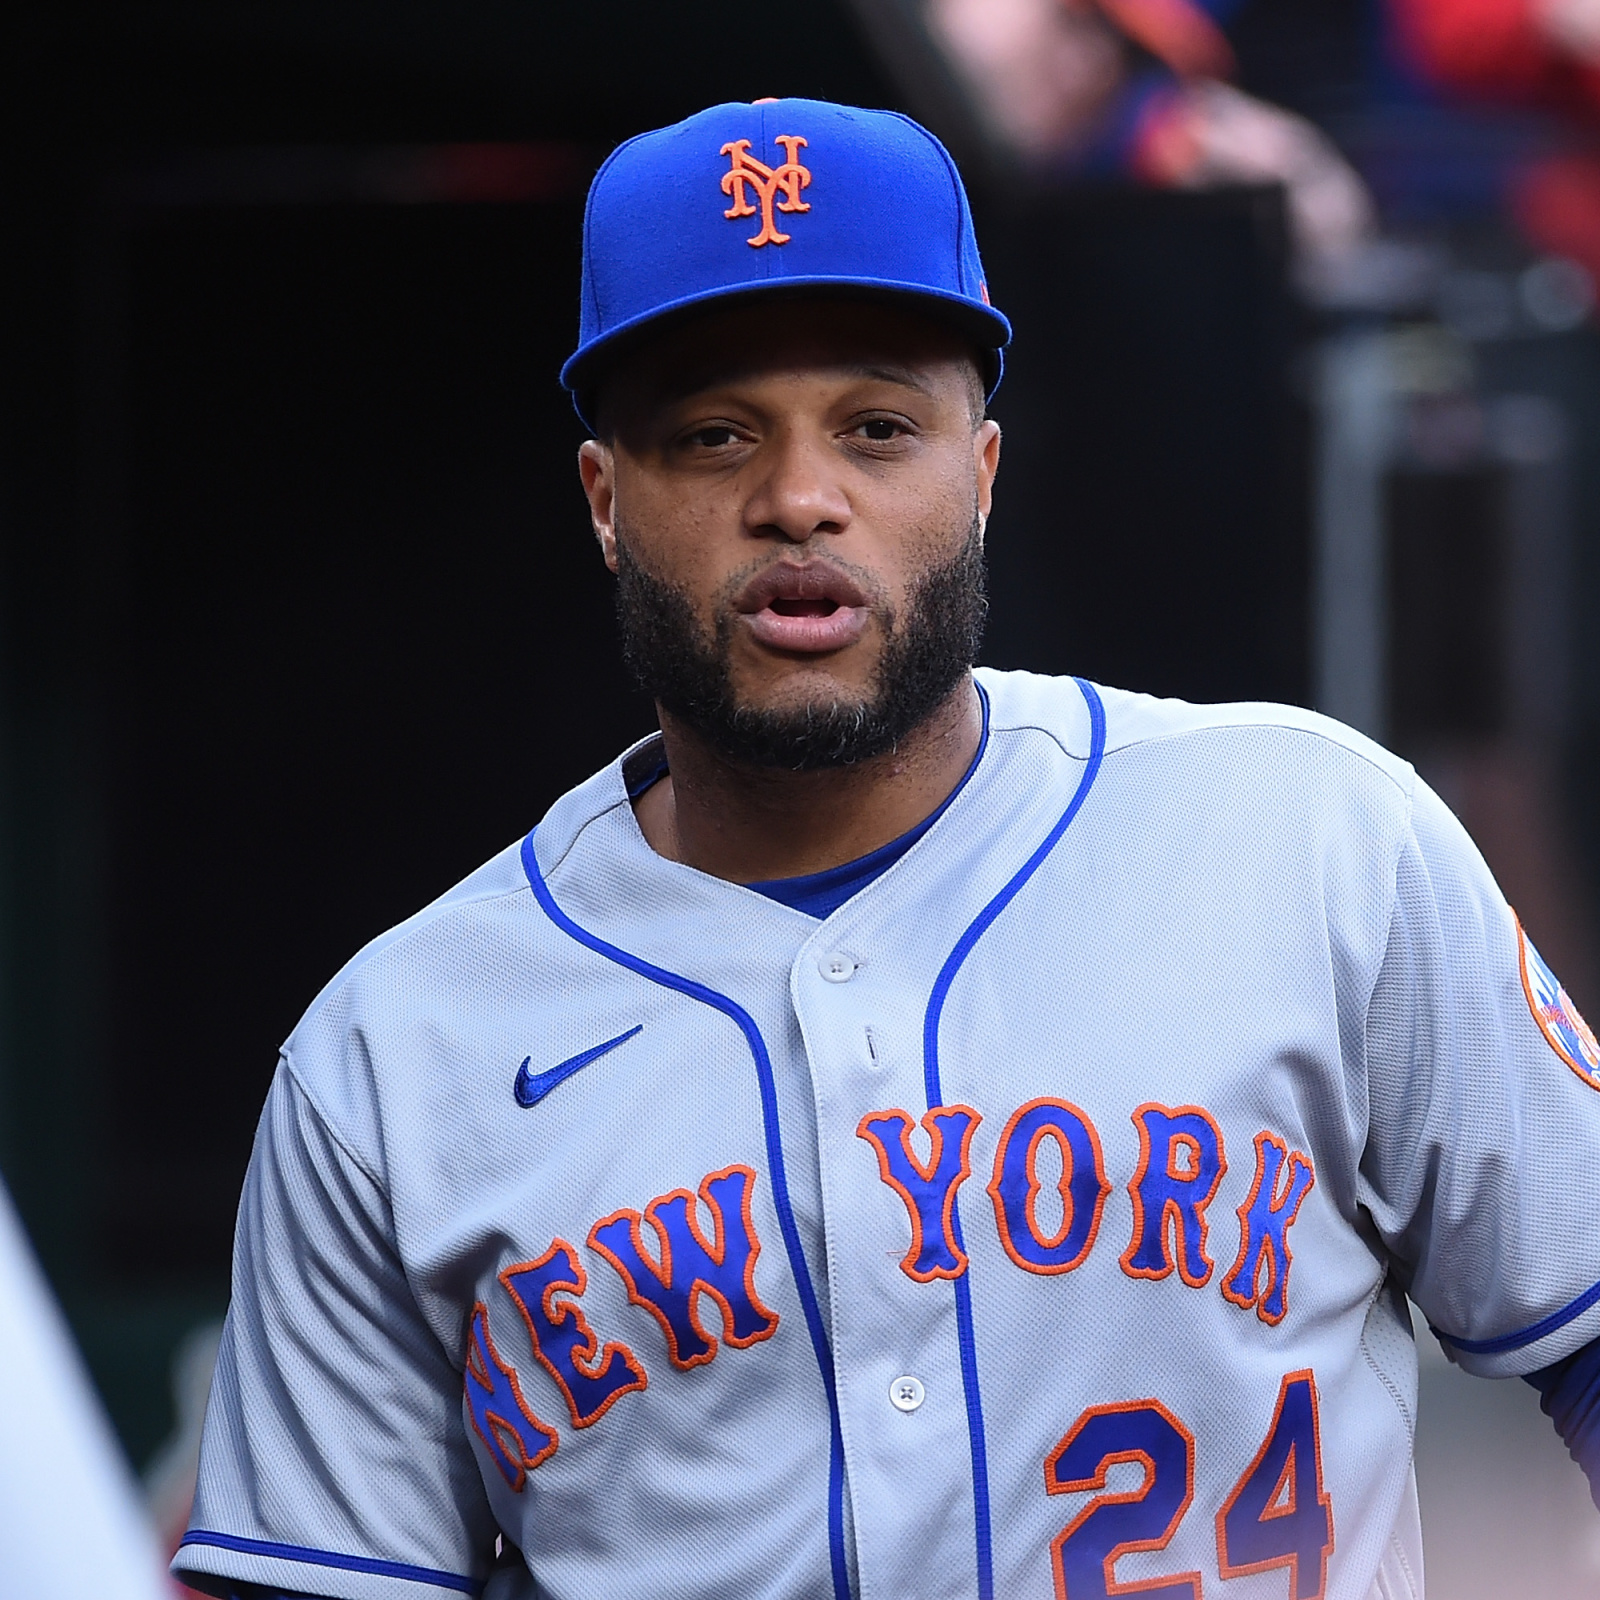 PEDs aren't the reason Mets' Robinson Cano won't be a Hall of